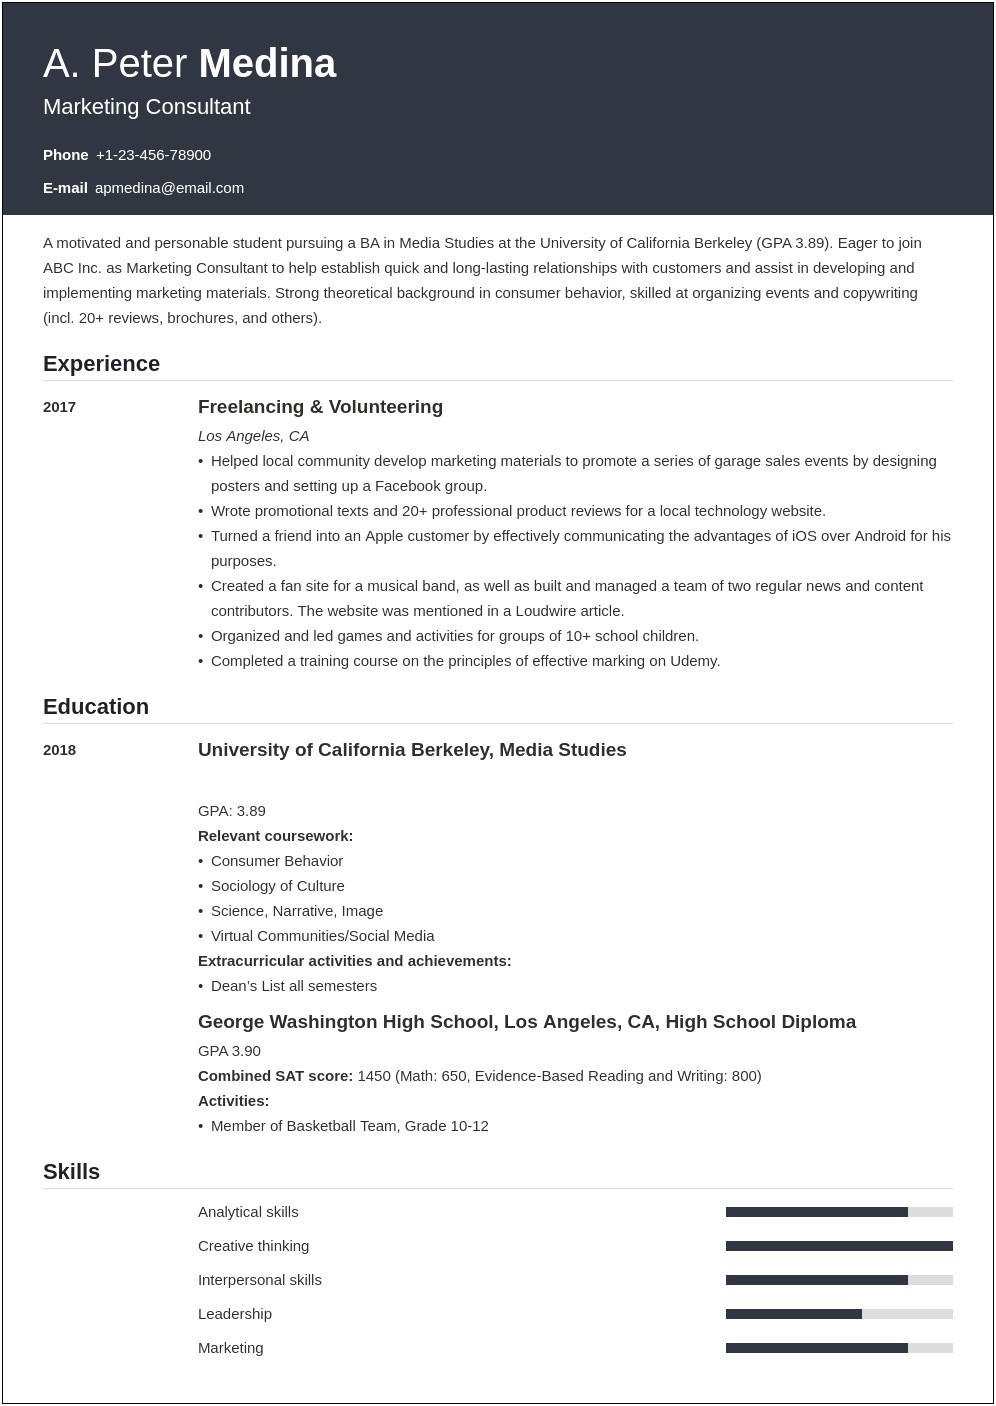 Resume Format For Recent College Graduate Without Experience